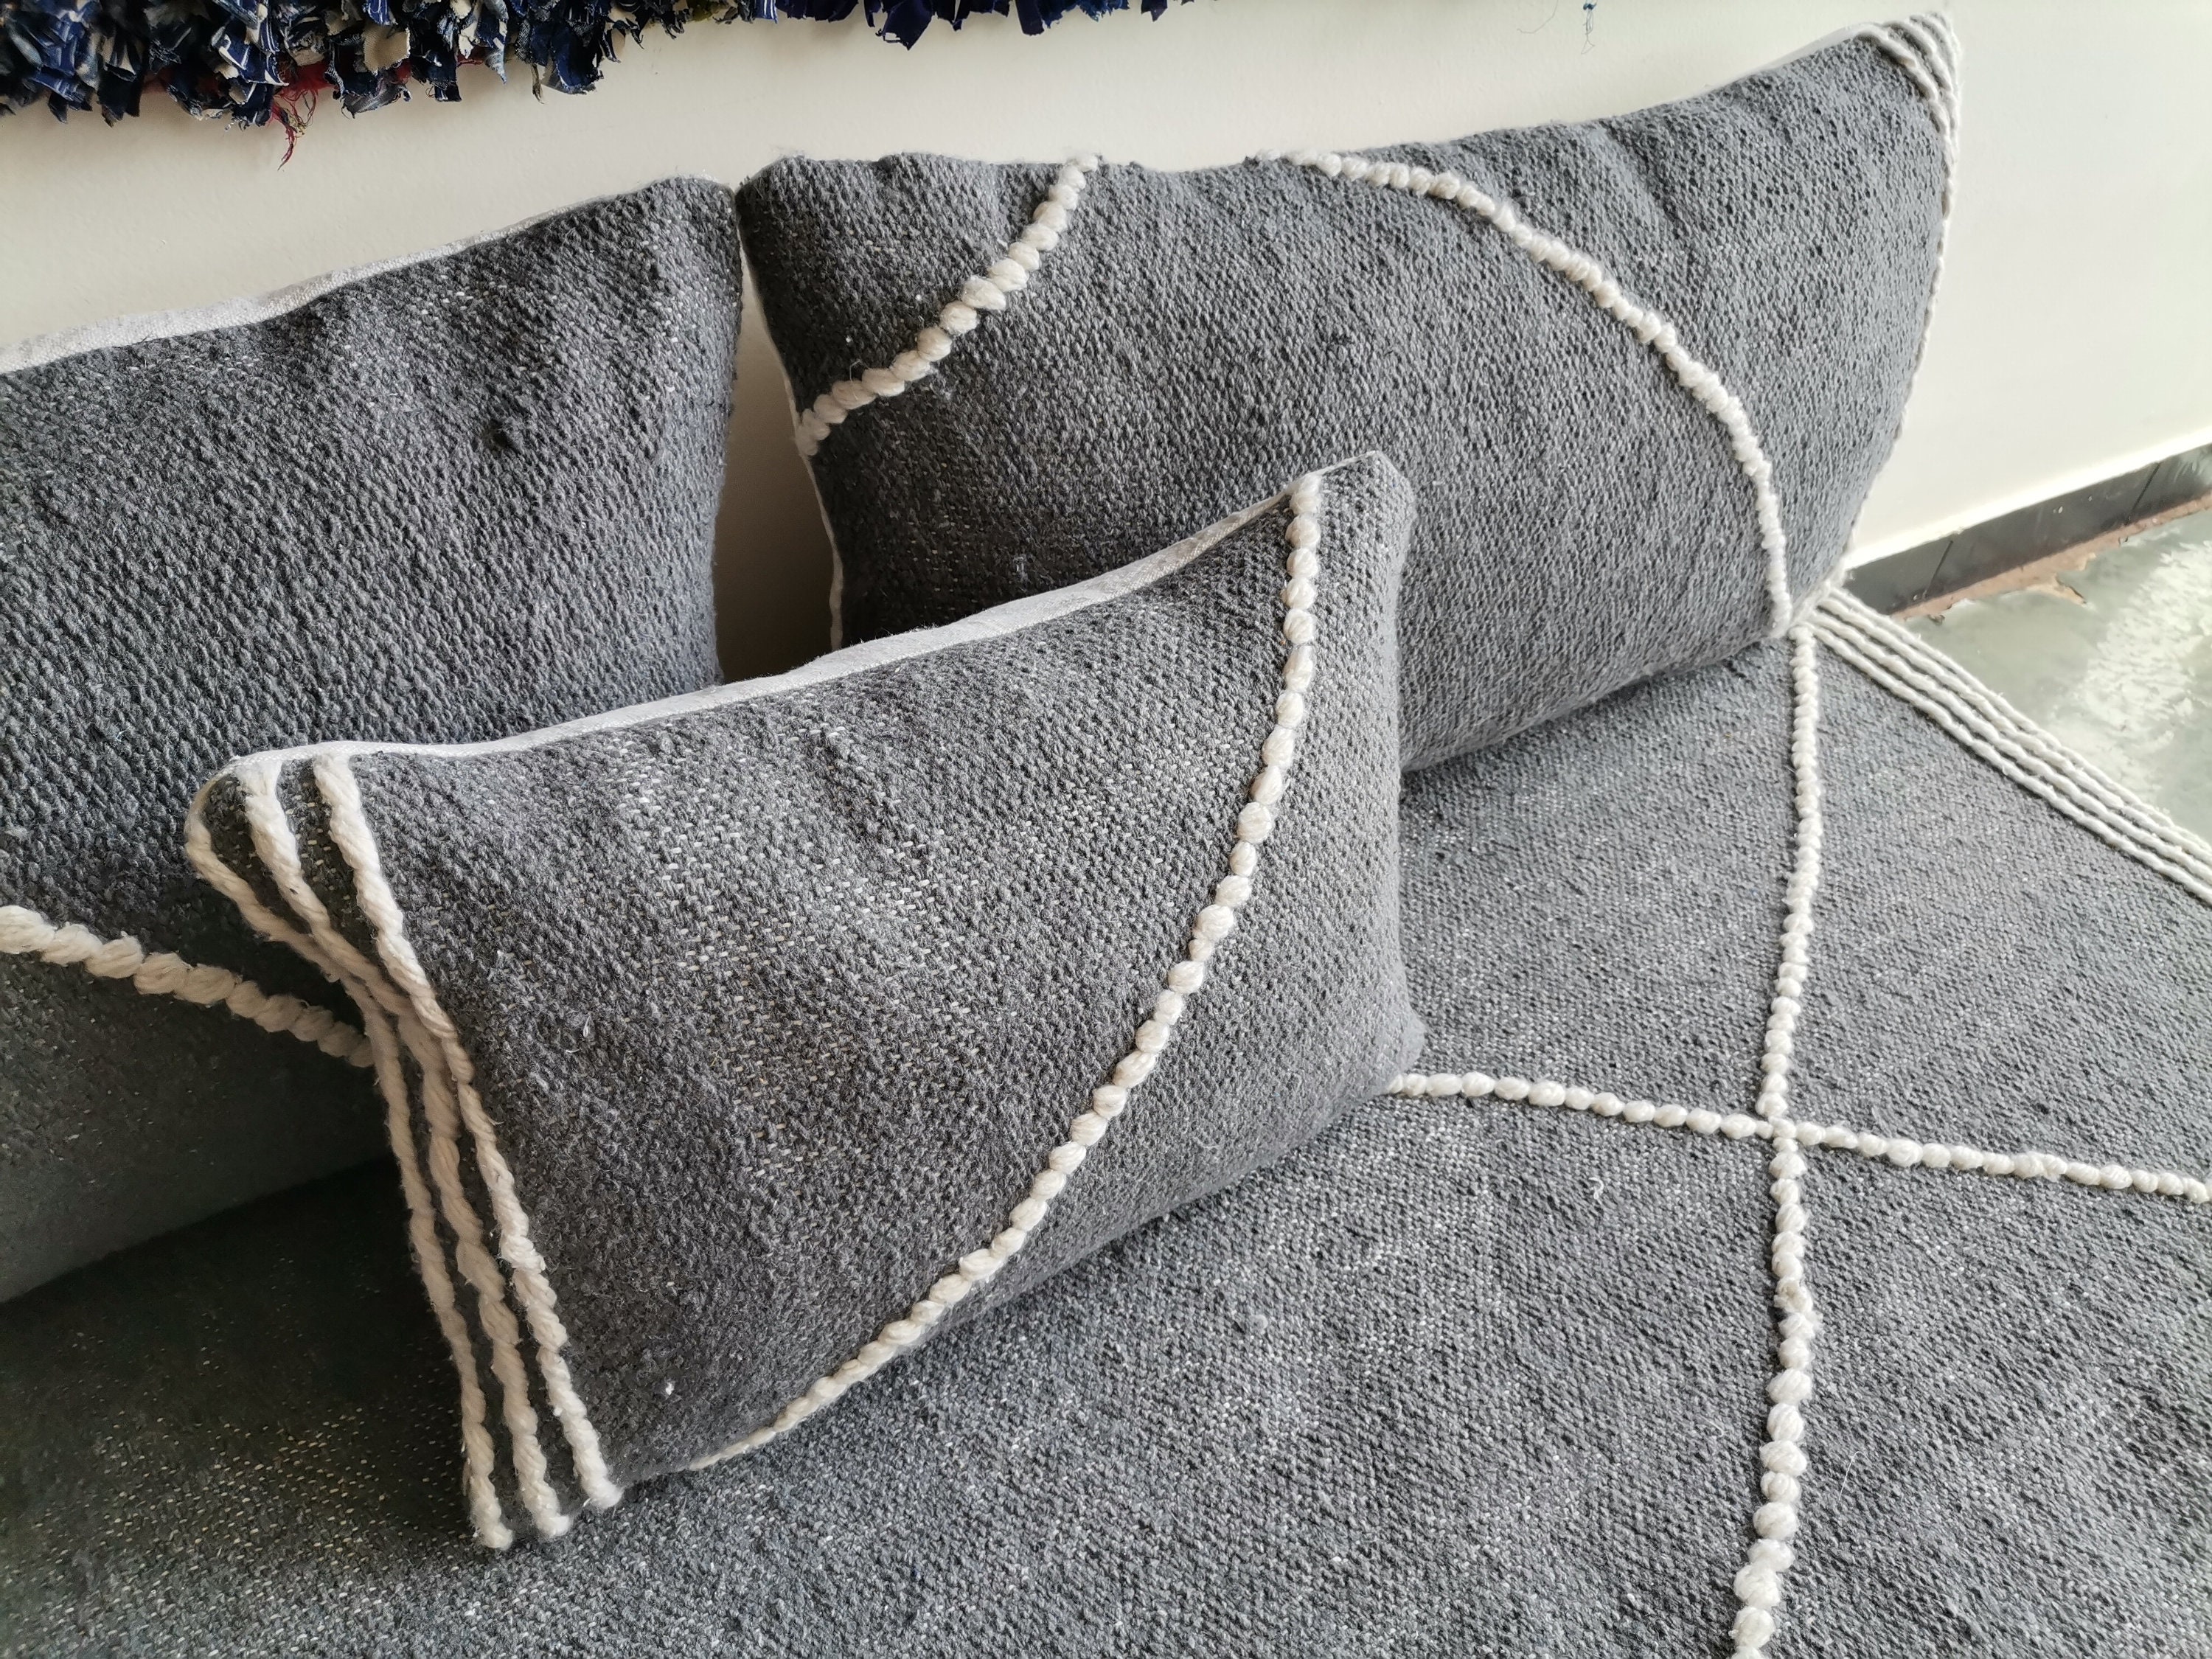 Moroccan Floor Couch 4,5,6 & 7 Ft 120/150/180/210 Cm Unstuffed Complete Set  Long Floor Cushion Stuffing Zipped Pouches 